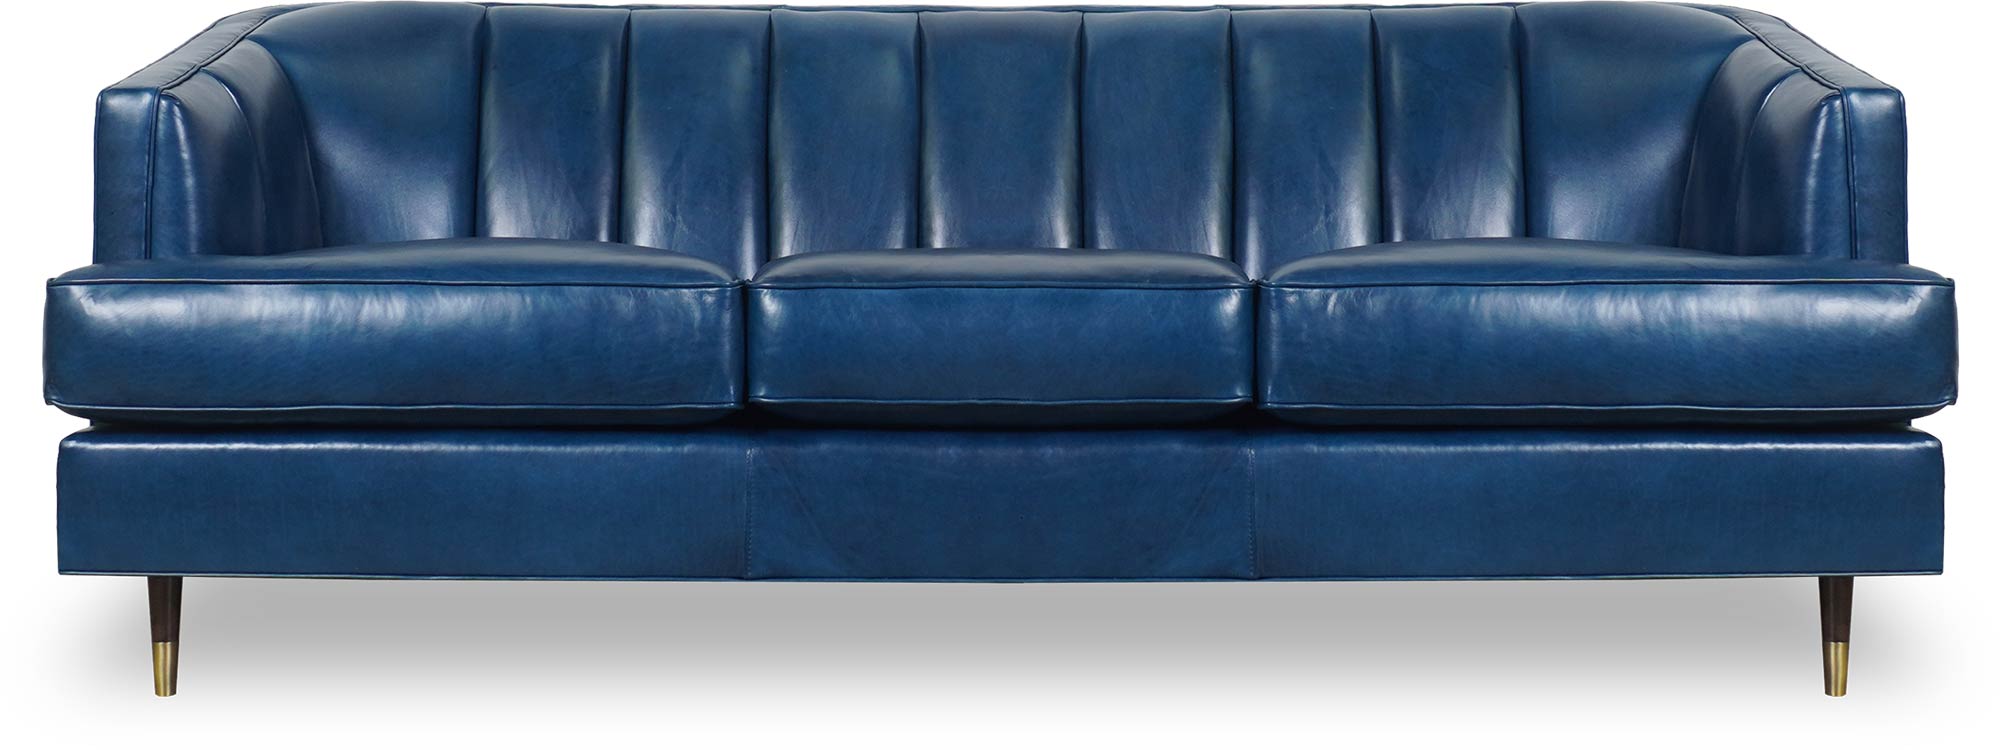 88 Cypress sofa in Bellissimo Nilo blue leather